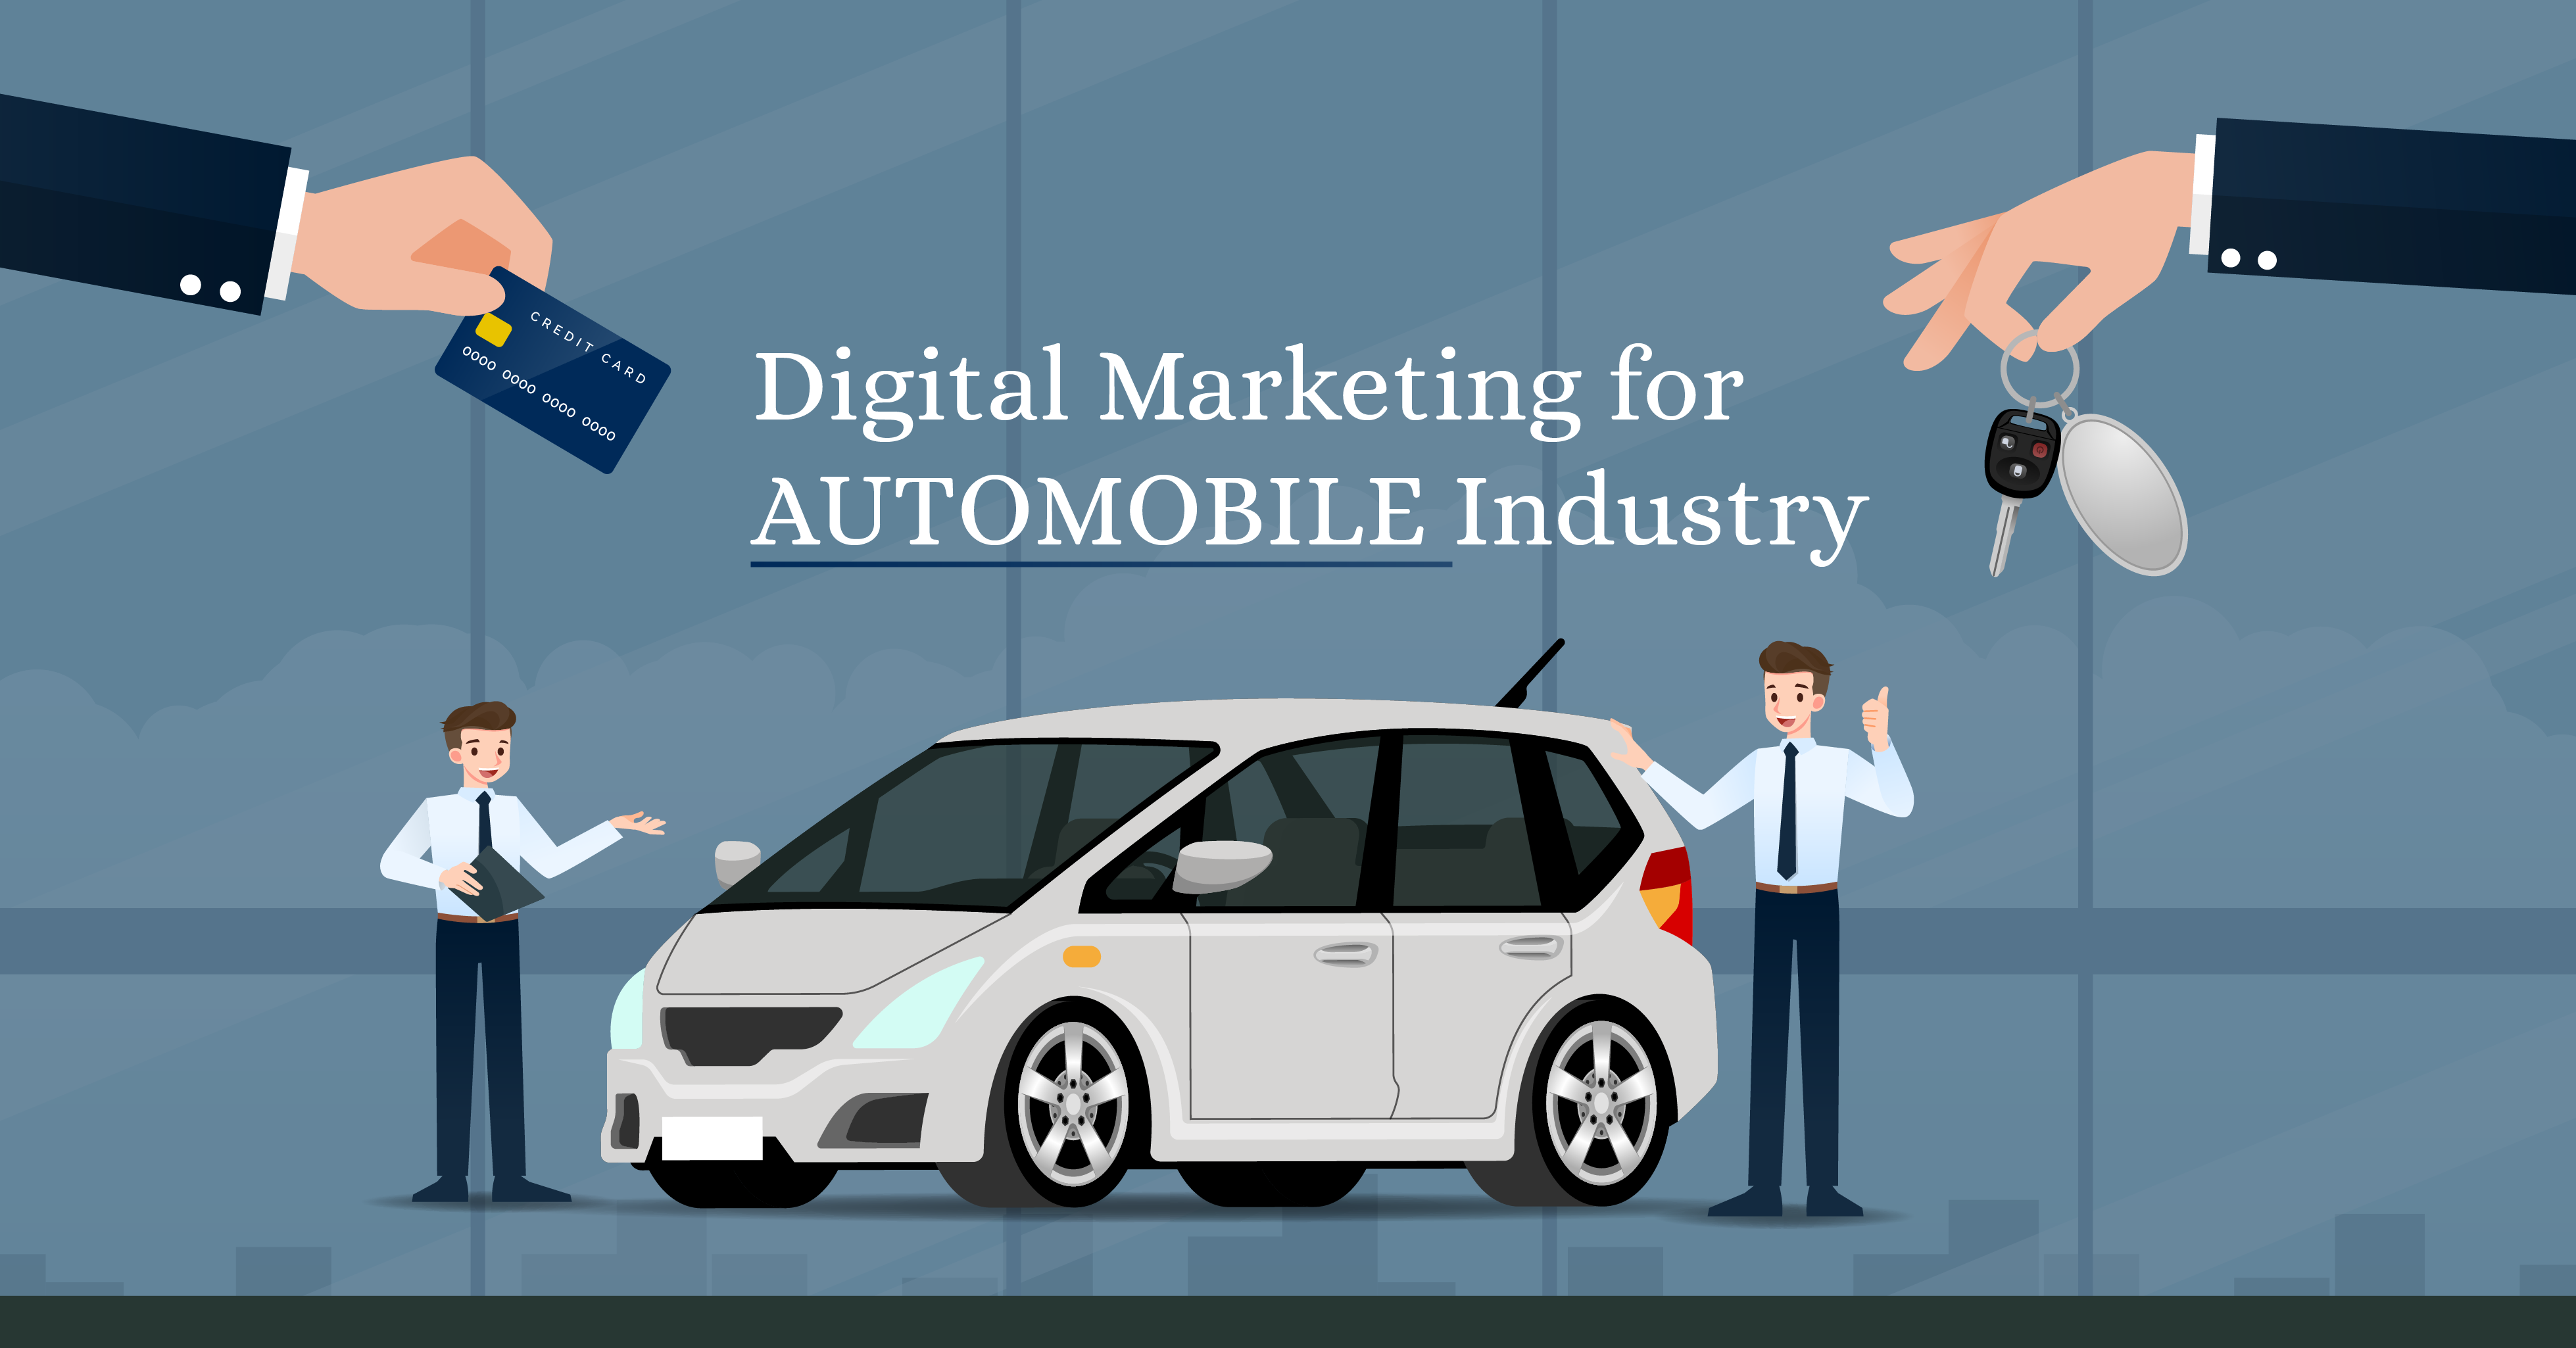 Digital Marketing with Messaging Apps for the Automotive Industry 